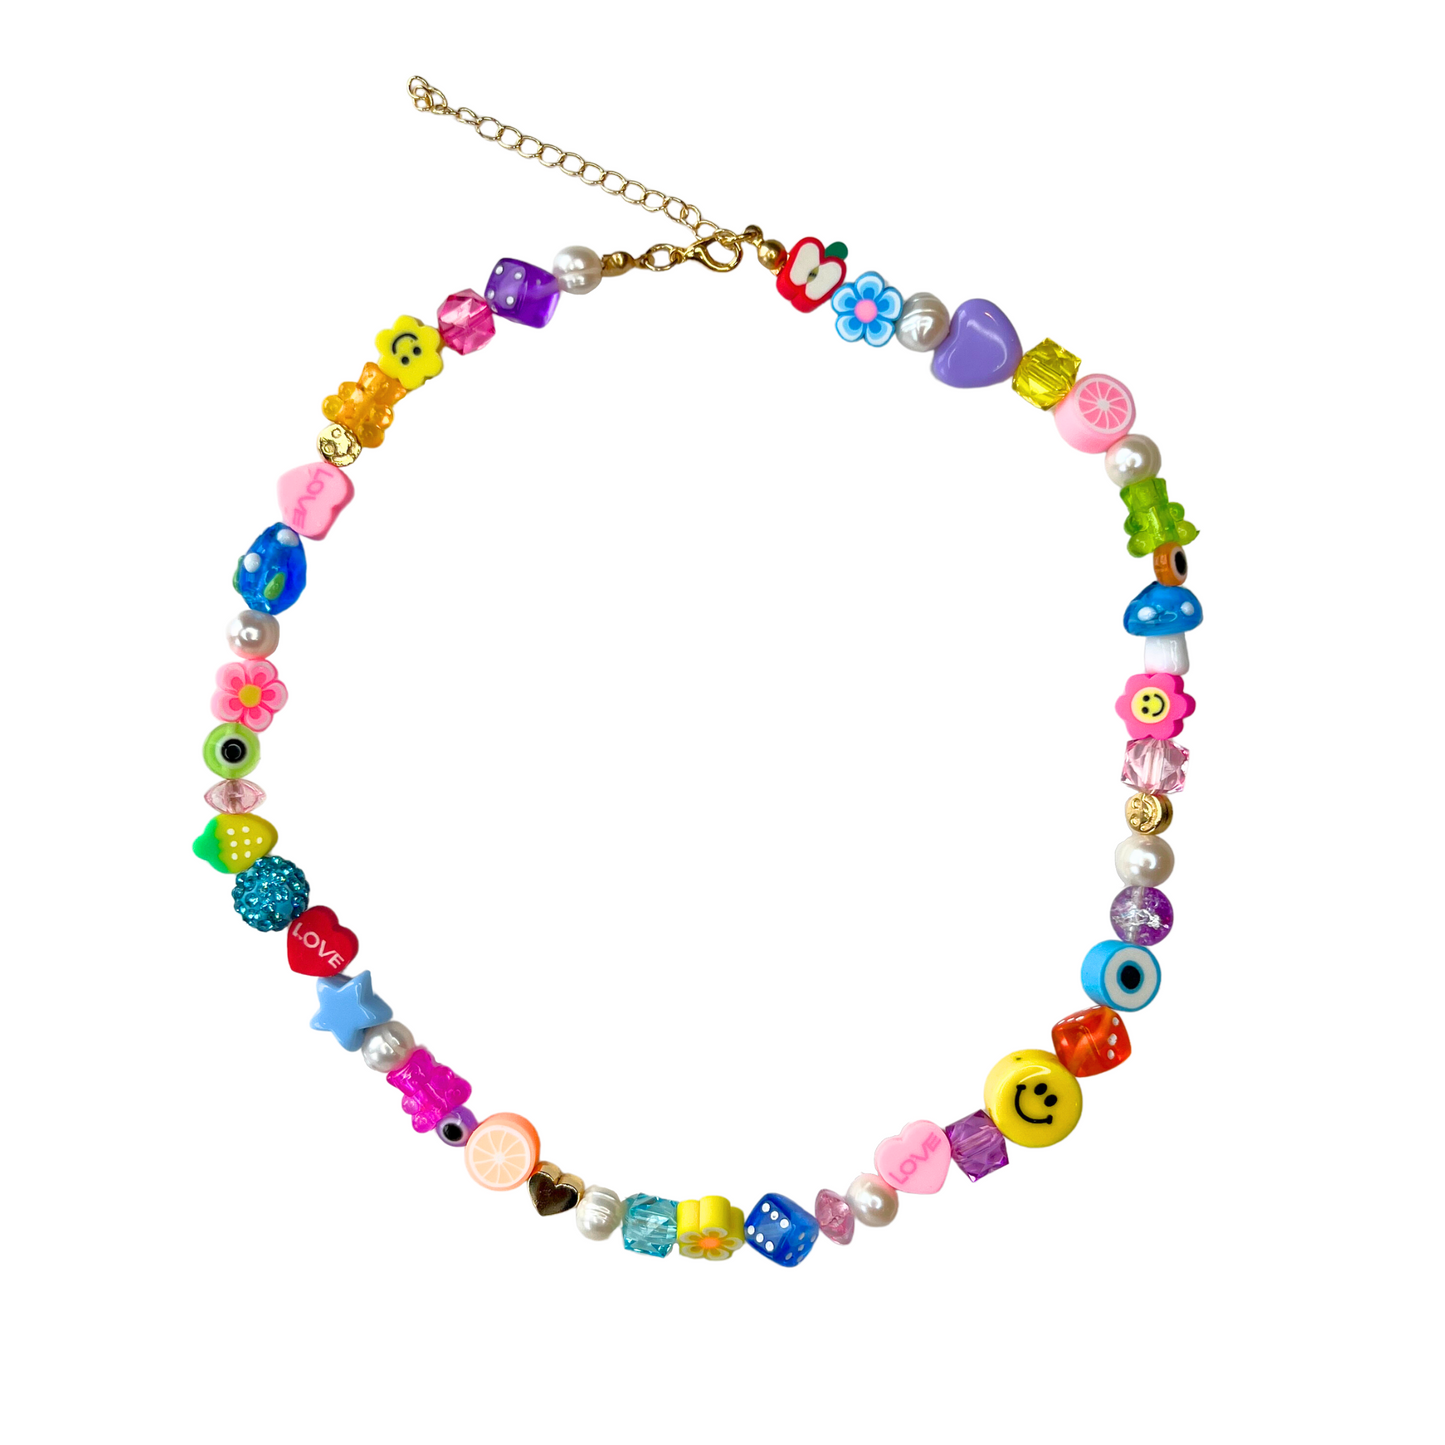 The Funkii Necklace